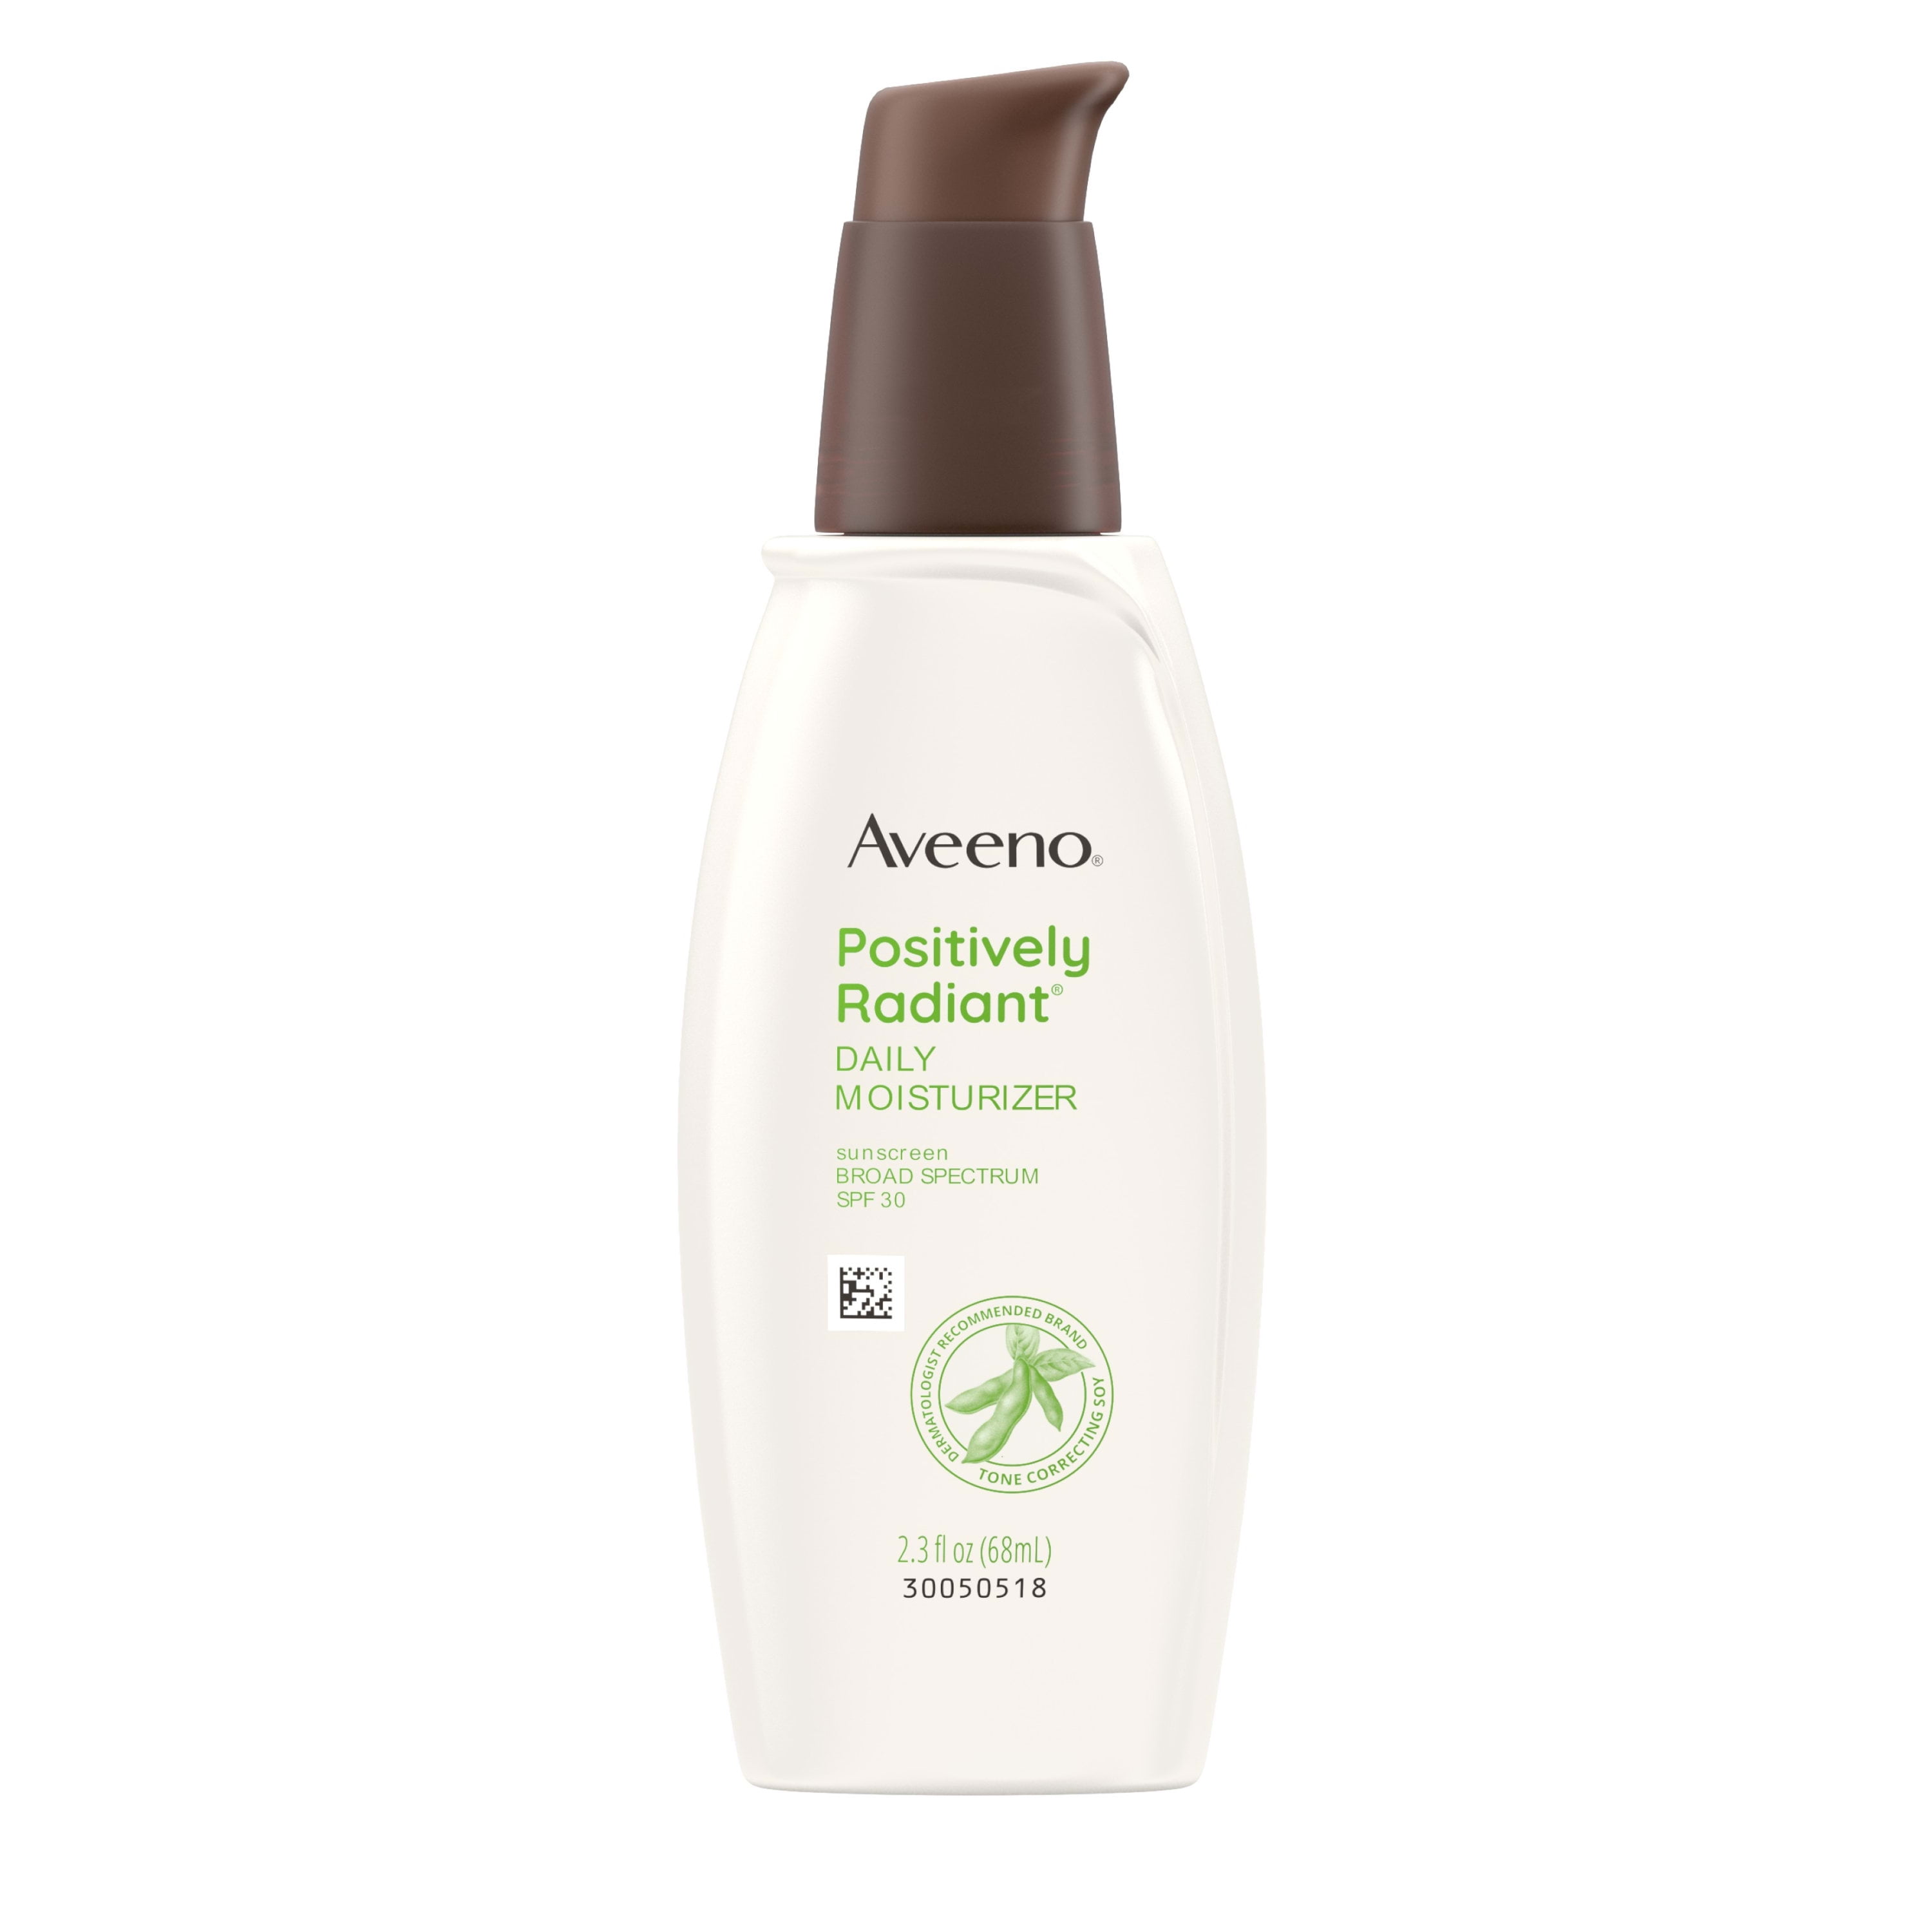 Aveeno Positively Radiant Daily Face Moisturizer with SPF 30, 2.3 oz